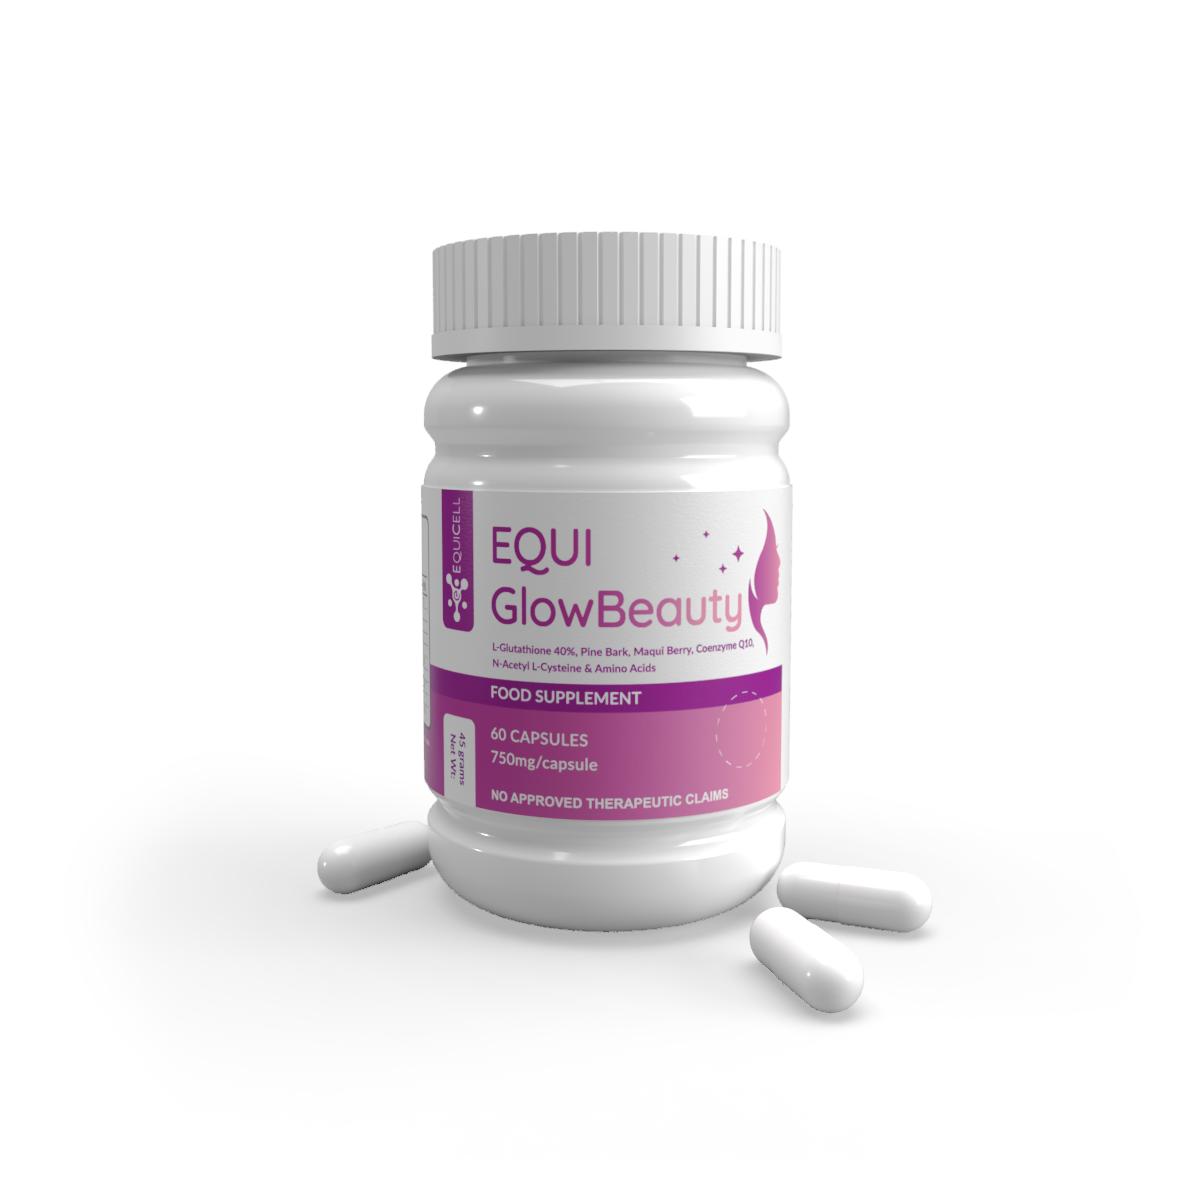 Equi GlowBeauty with L-Glutathione, Co-Q10, Amino Acids, Pine Bark, Maqui Berry, and more | Equicell